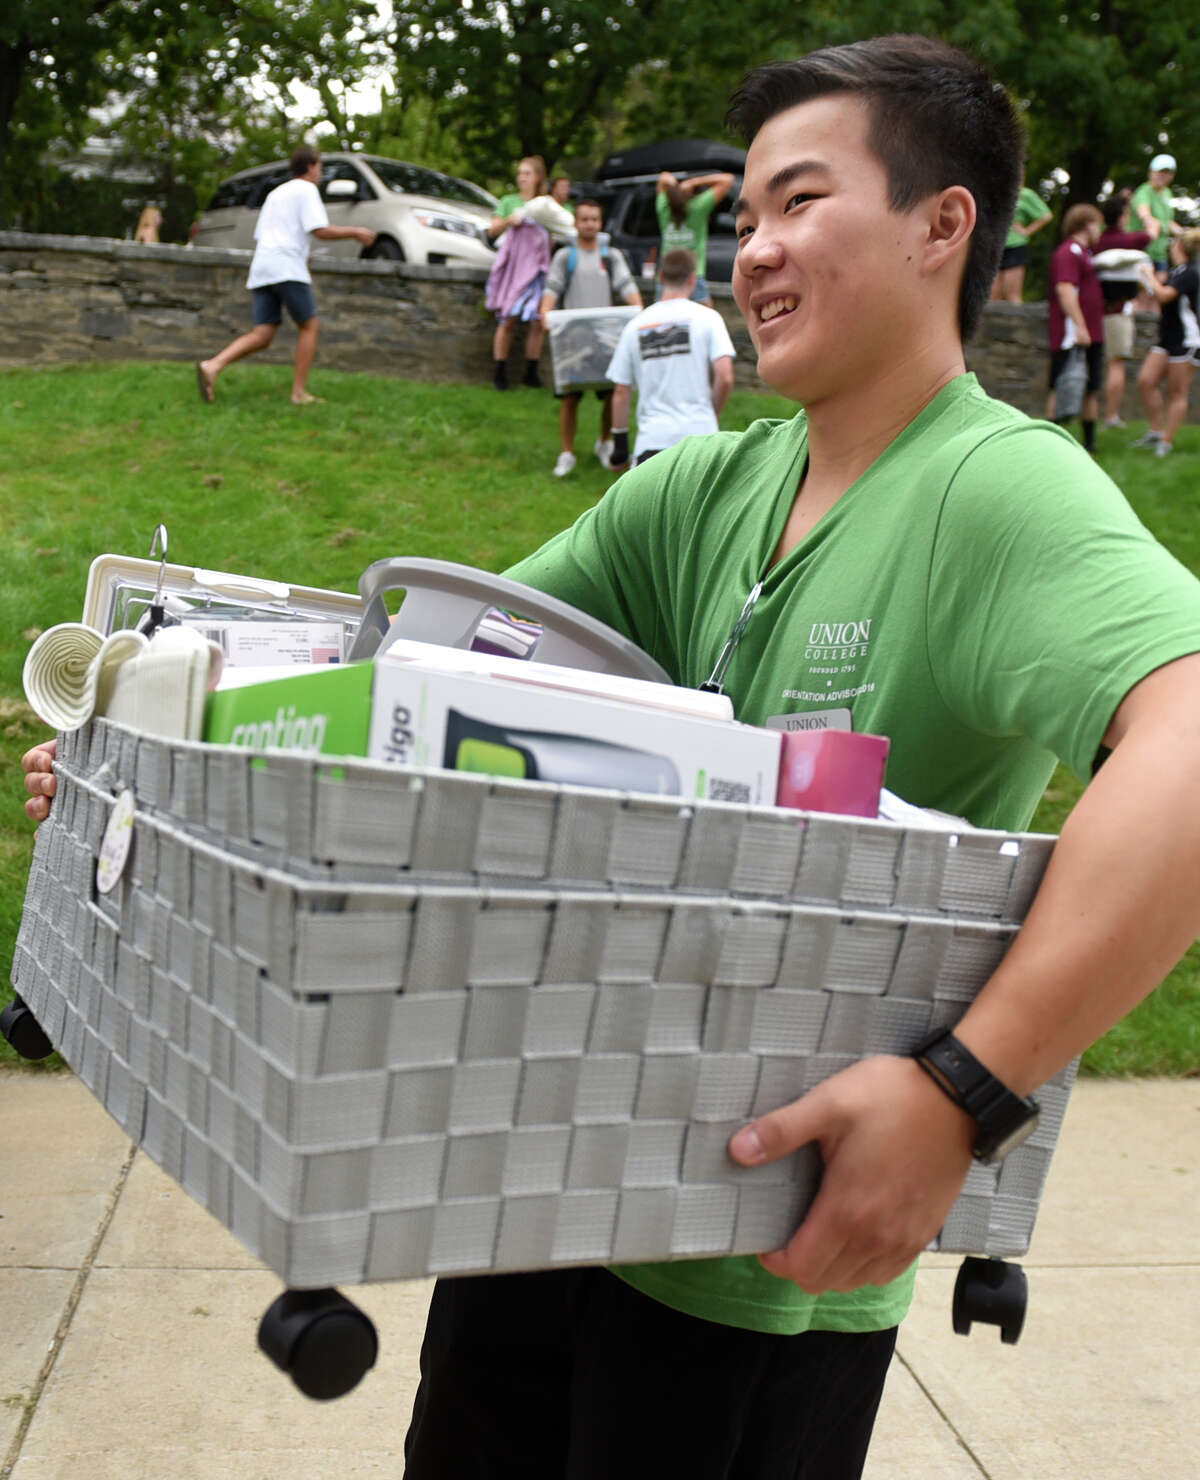 Orientation advisor Brian Lee, 19, helps freshmen move in on Wednesday, Aug. 31, 2016, at Union College in Schenectady, N.Y. (Cindy Schultz / Times Union)